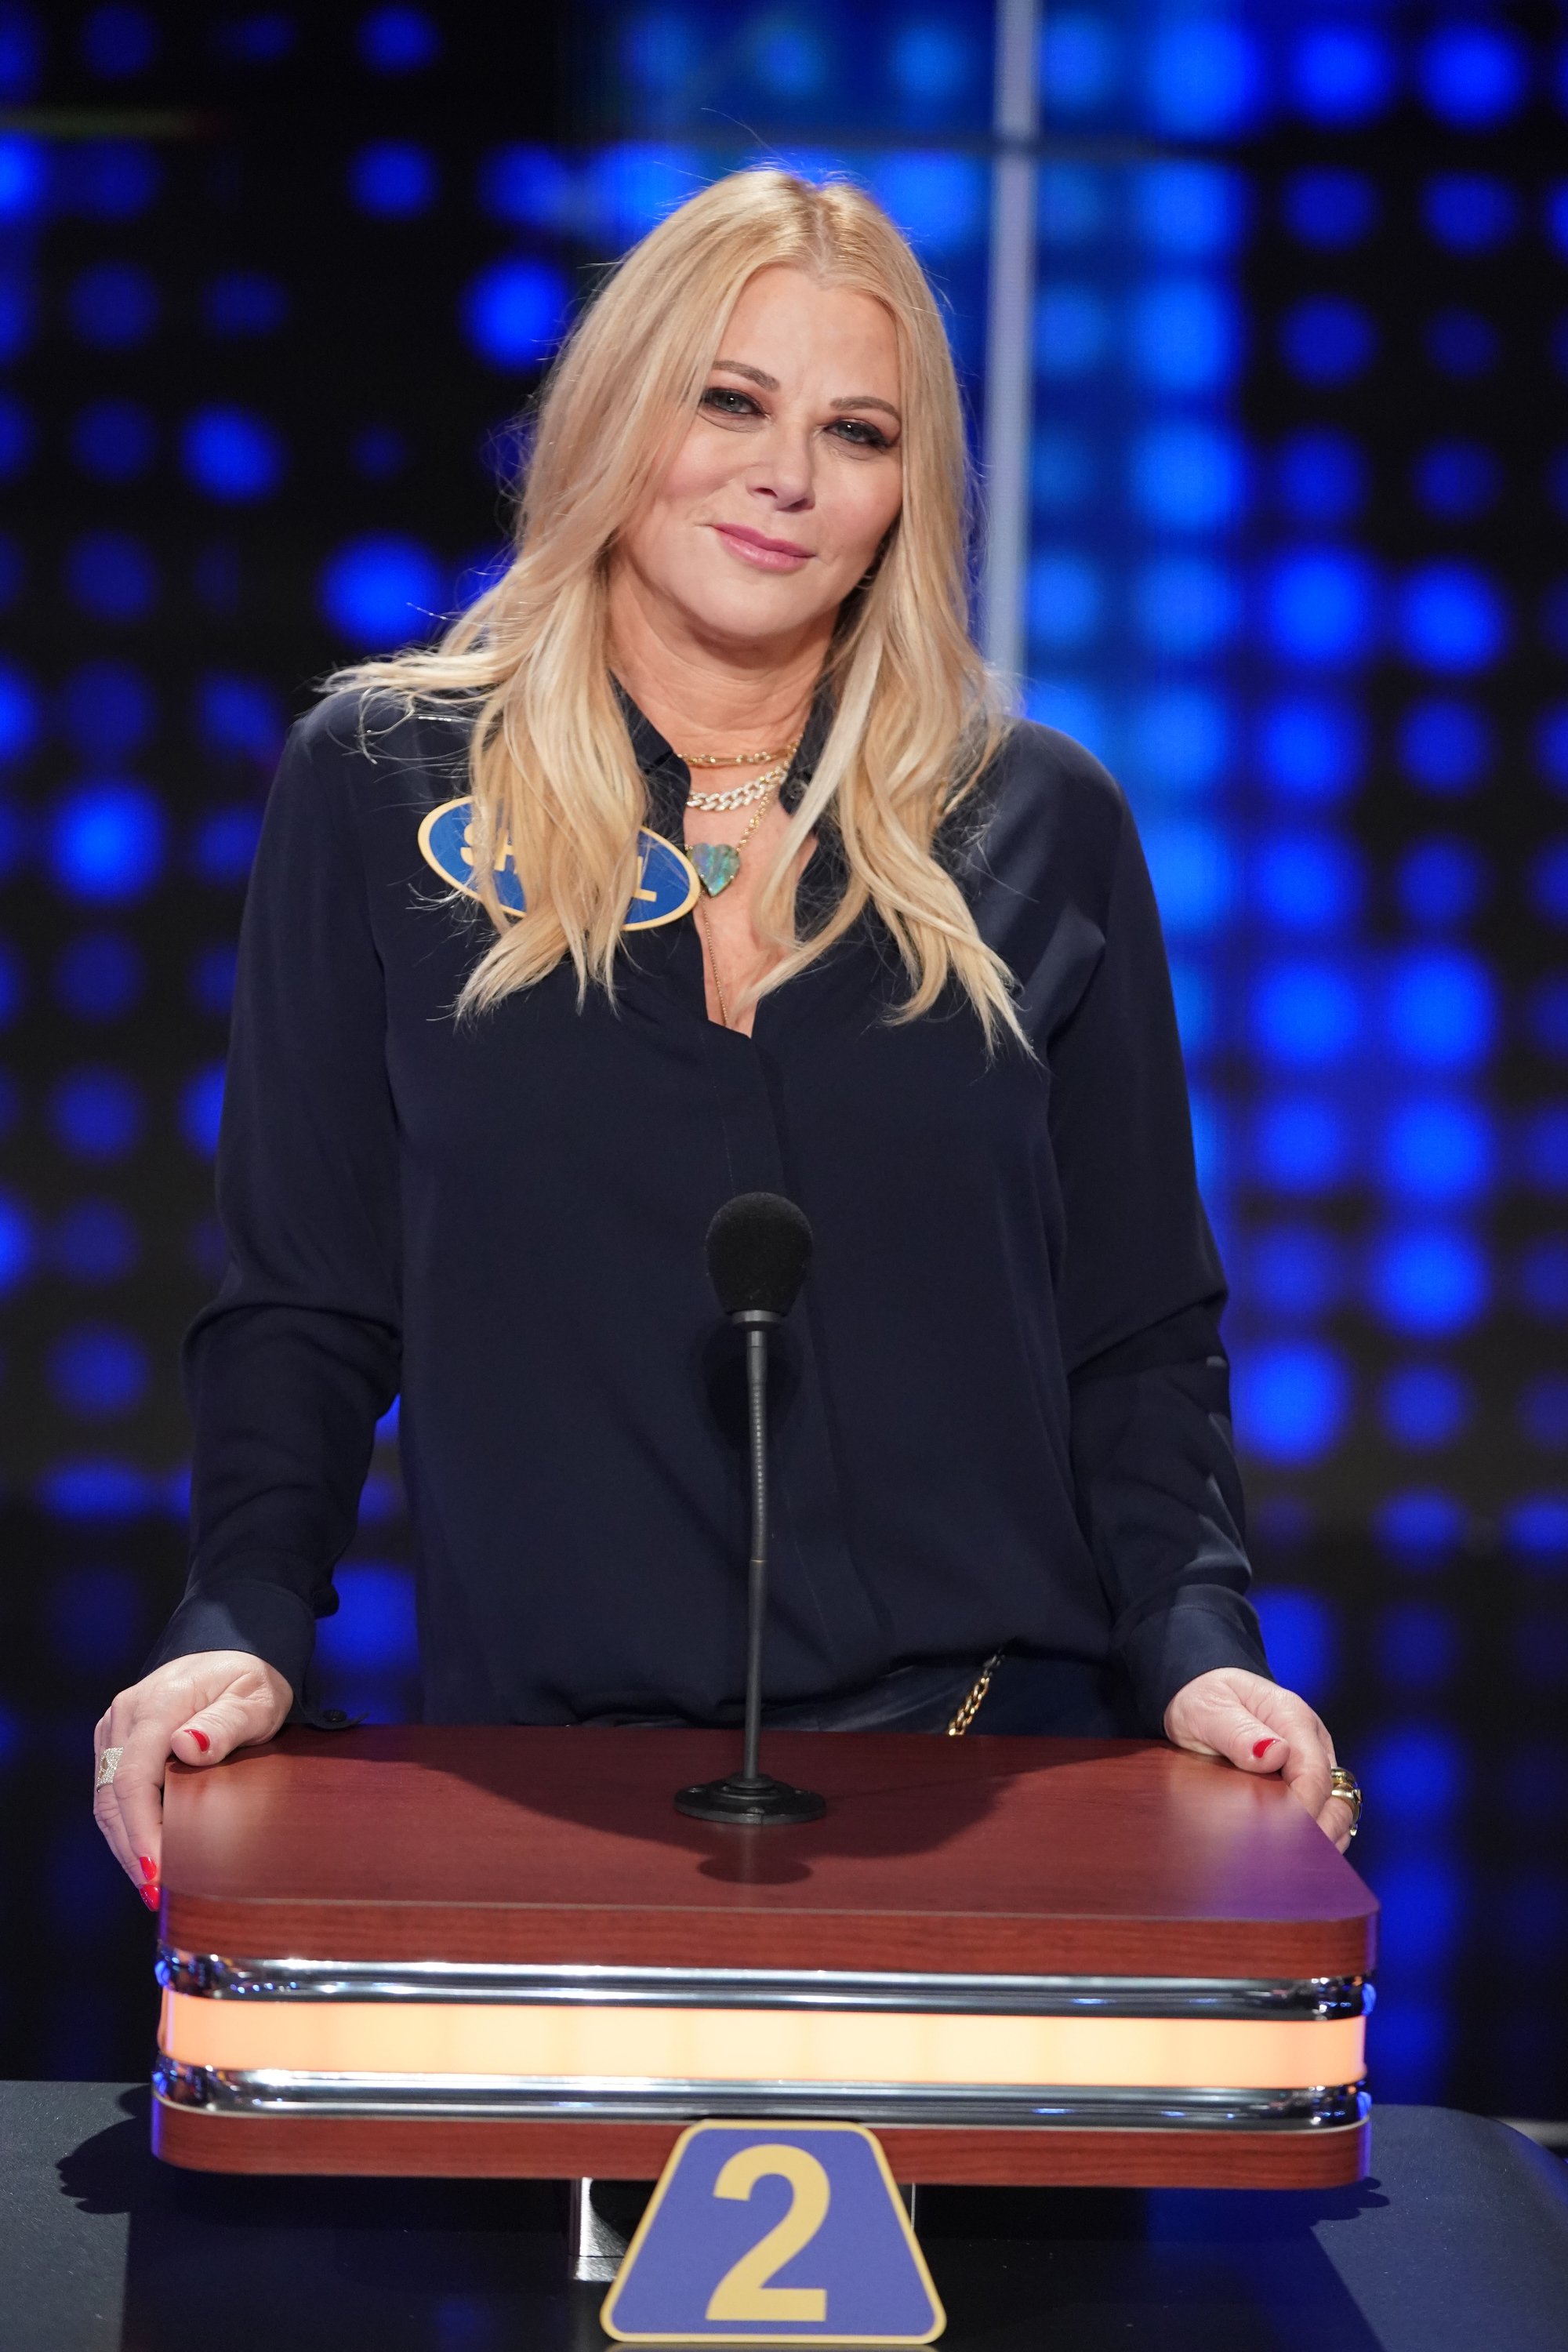 Sheryl Berkoff on an episode of "Celebrity Family Feud" on April 10, 2021 | Source: Getty Images